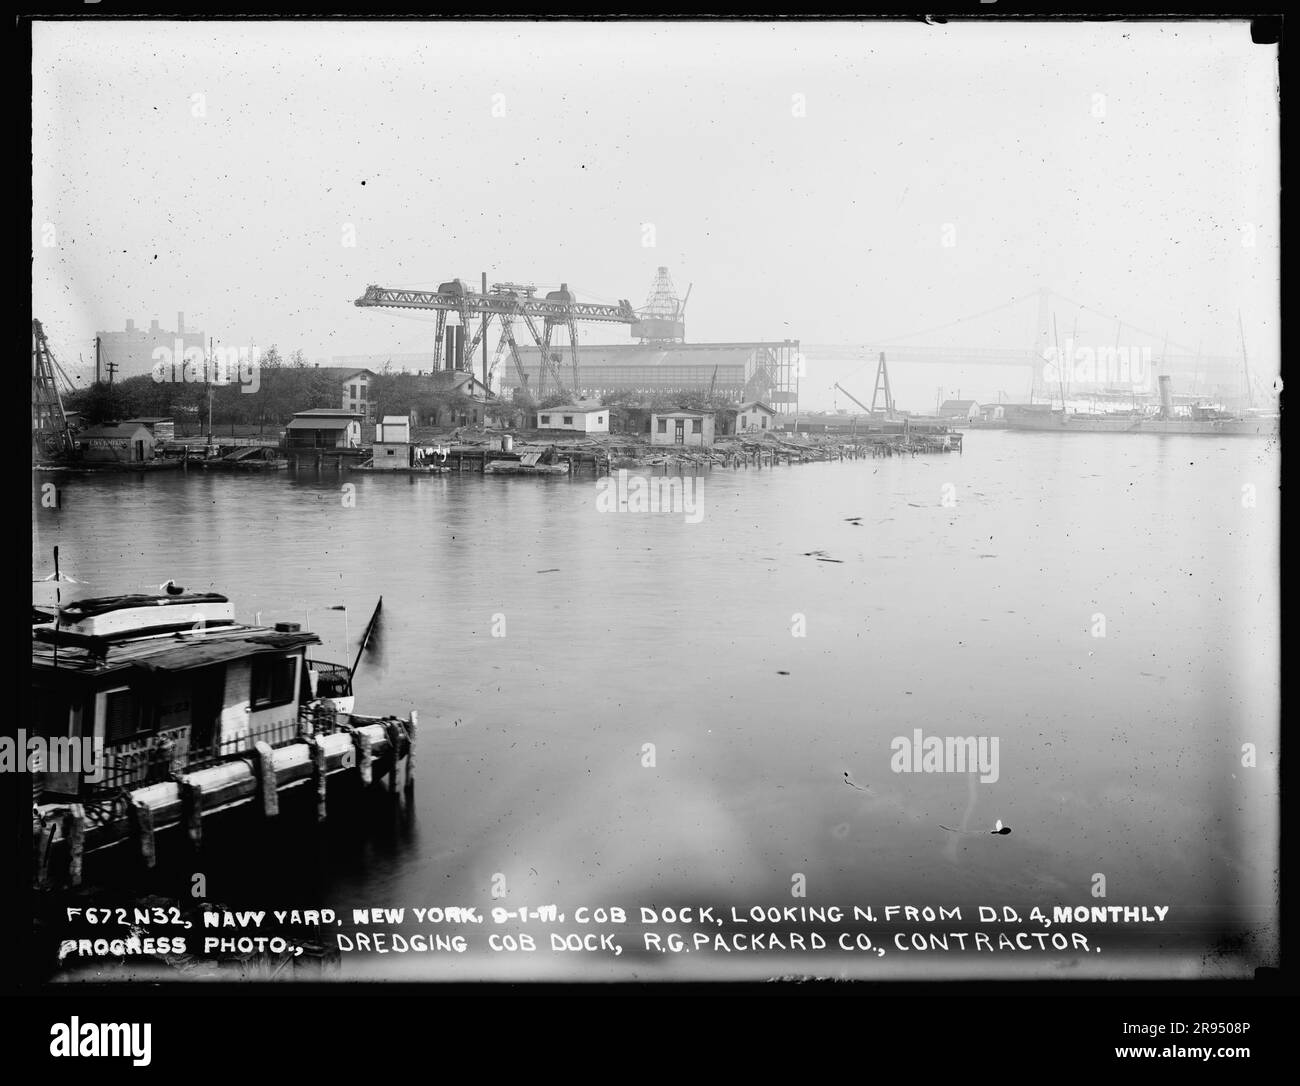 Cob Dock, Looking North from Dry Dock 4, Monthly Progress Photo, Dredging Cob Dock, R. G. Packard Company, Contractor. Glass Plate Negatives of the Construction and Repair of Buildings, Facilities, and Vessels at the New York Navy Yard. Stock Photo